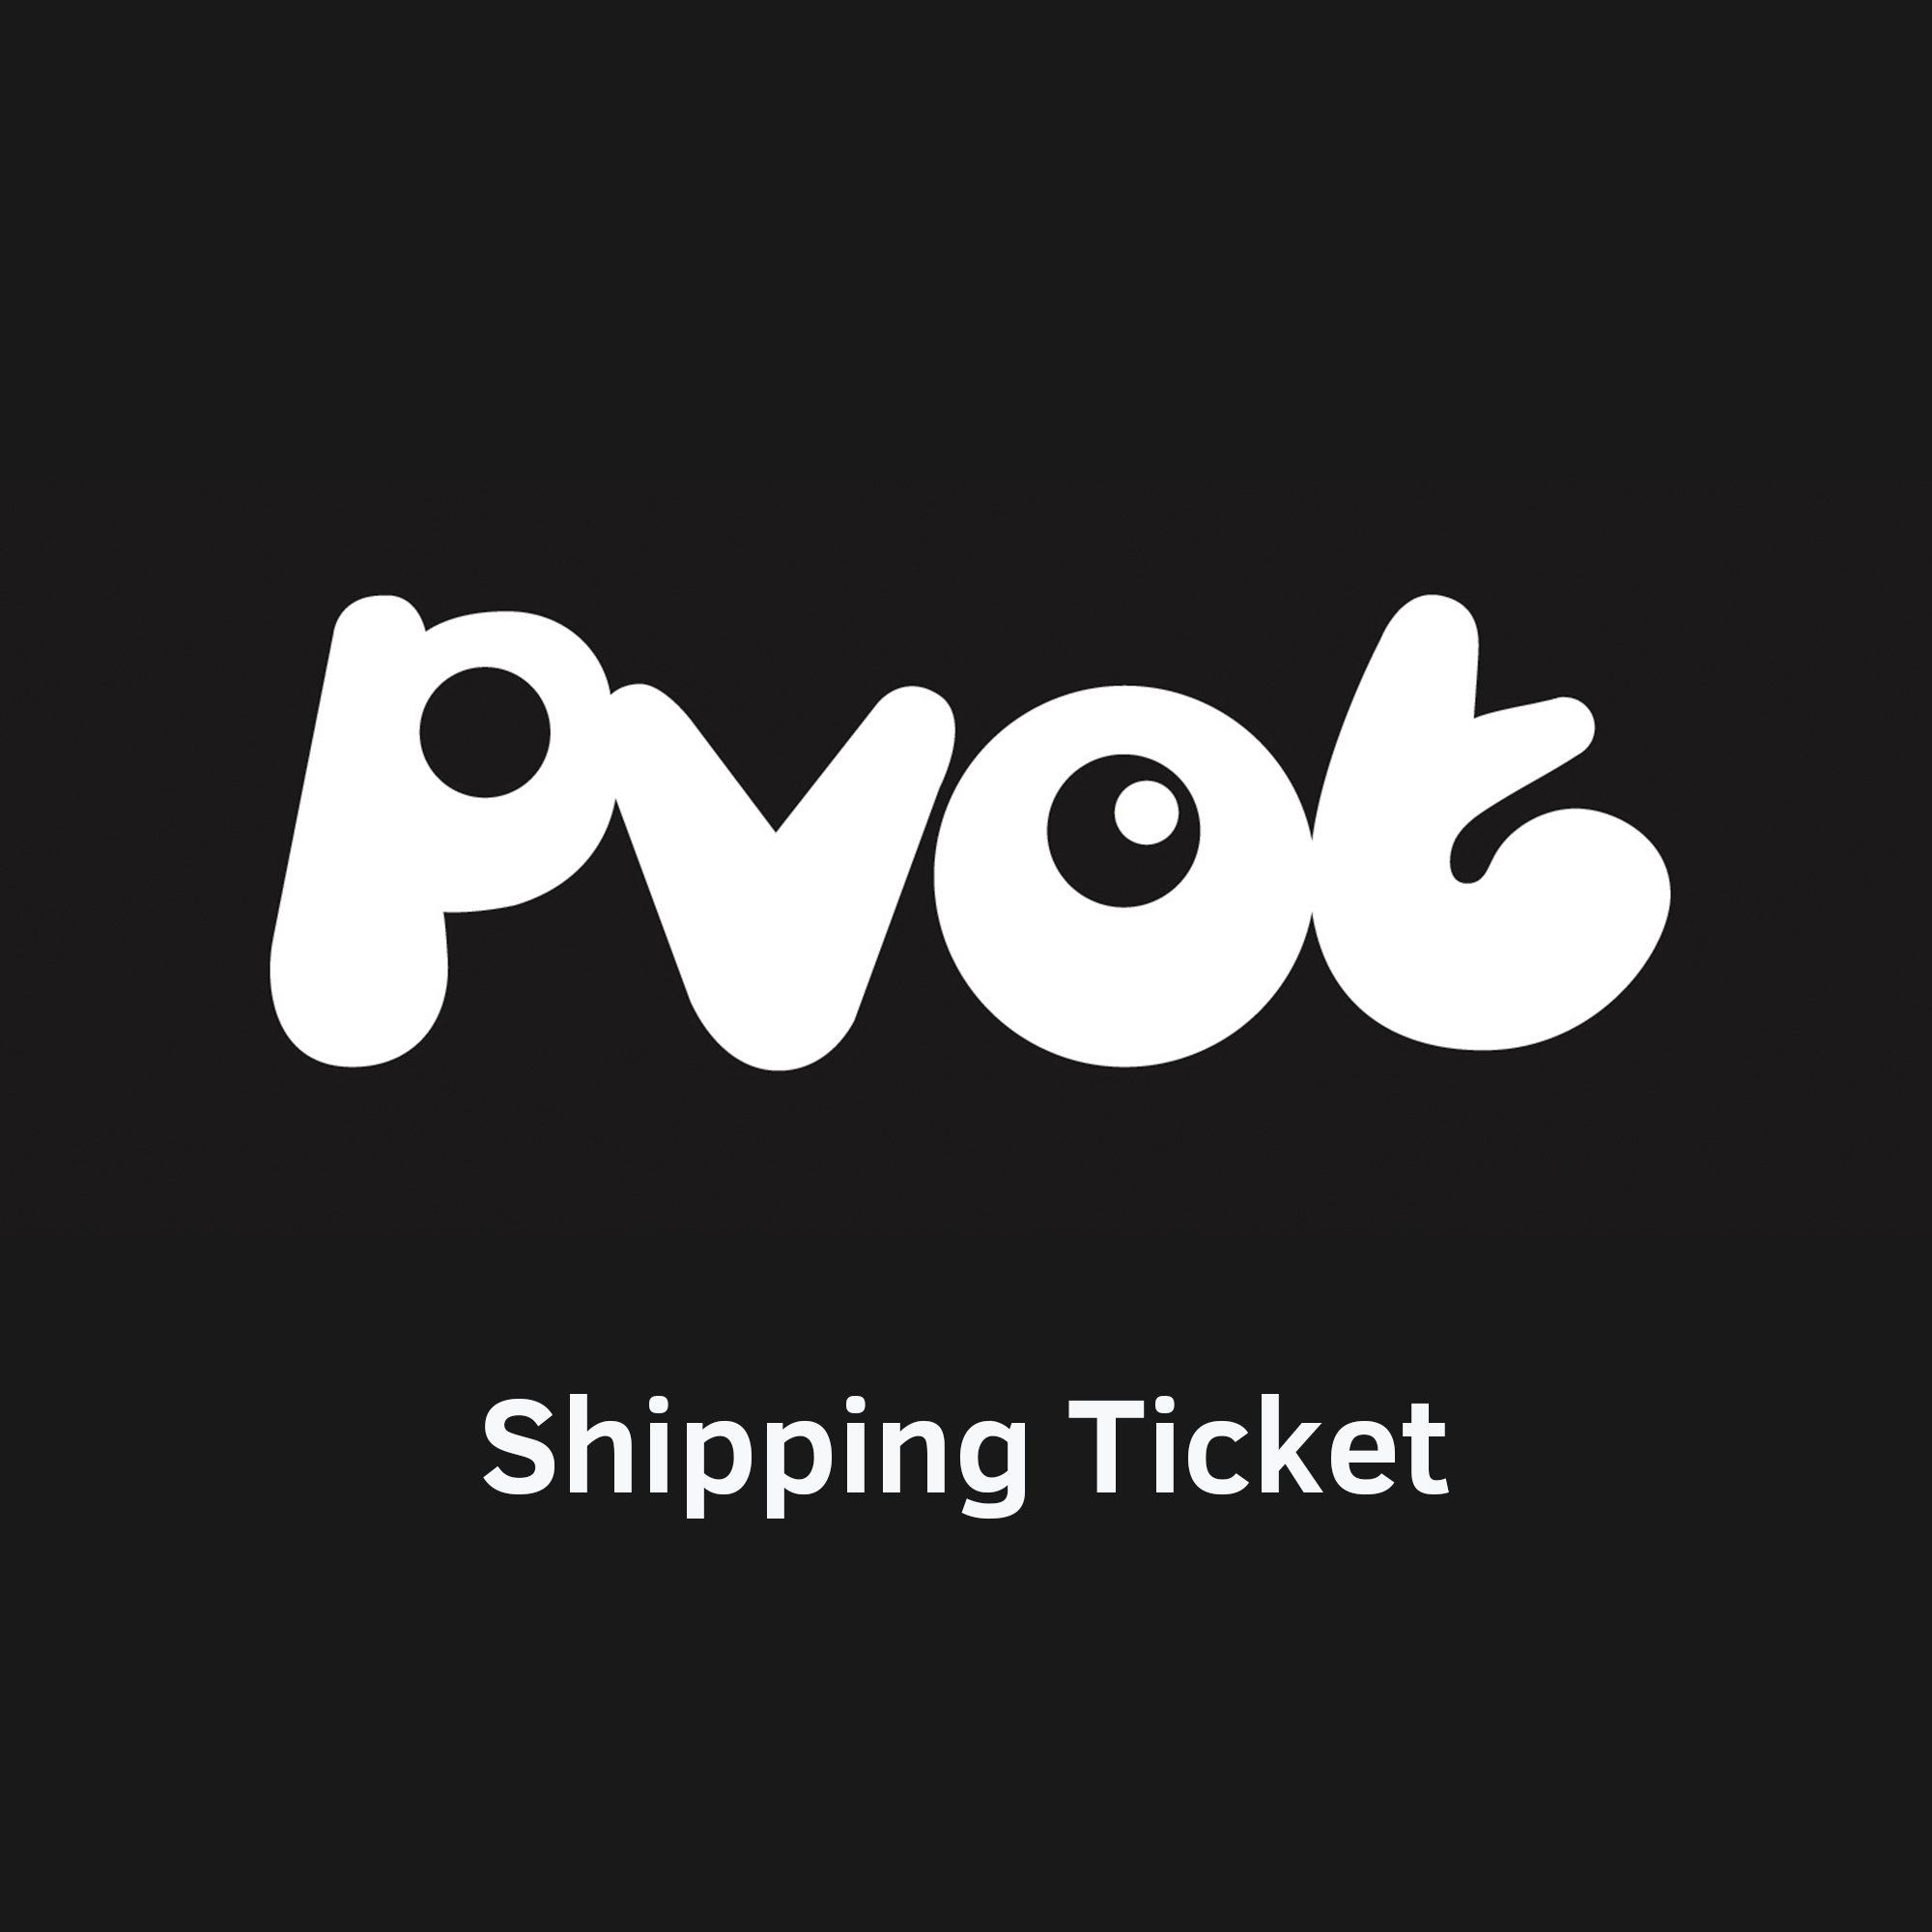 Shipping Ticket